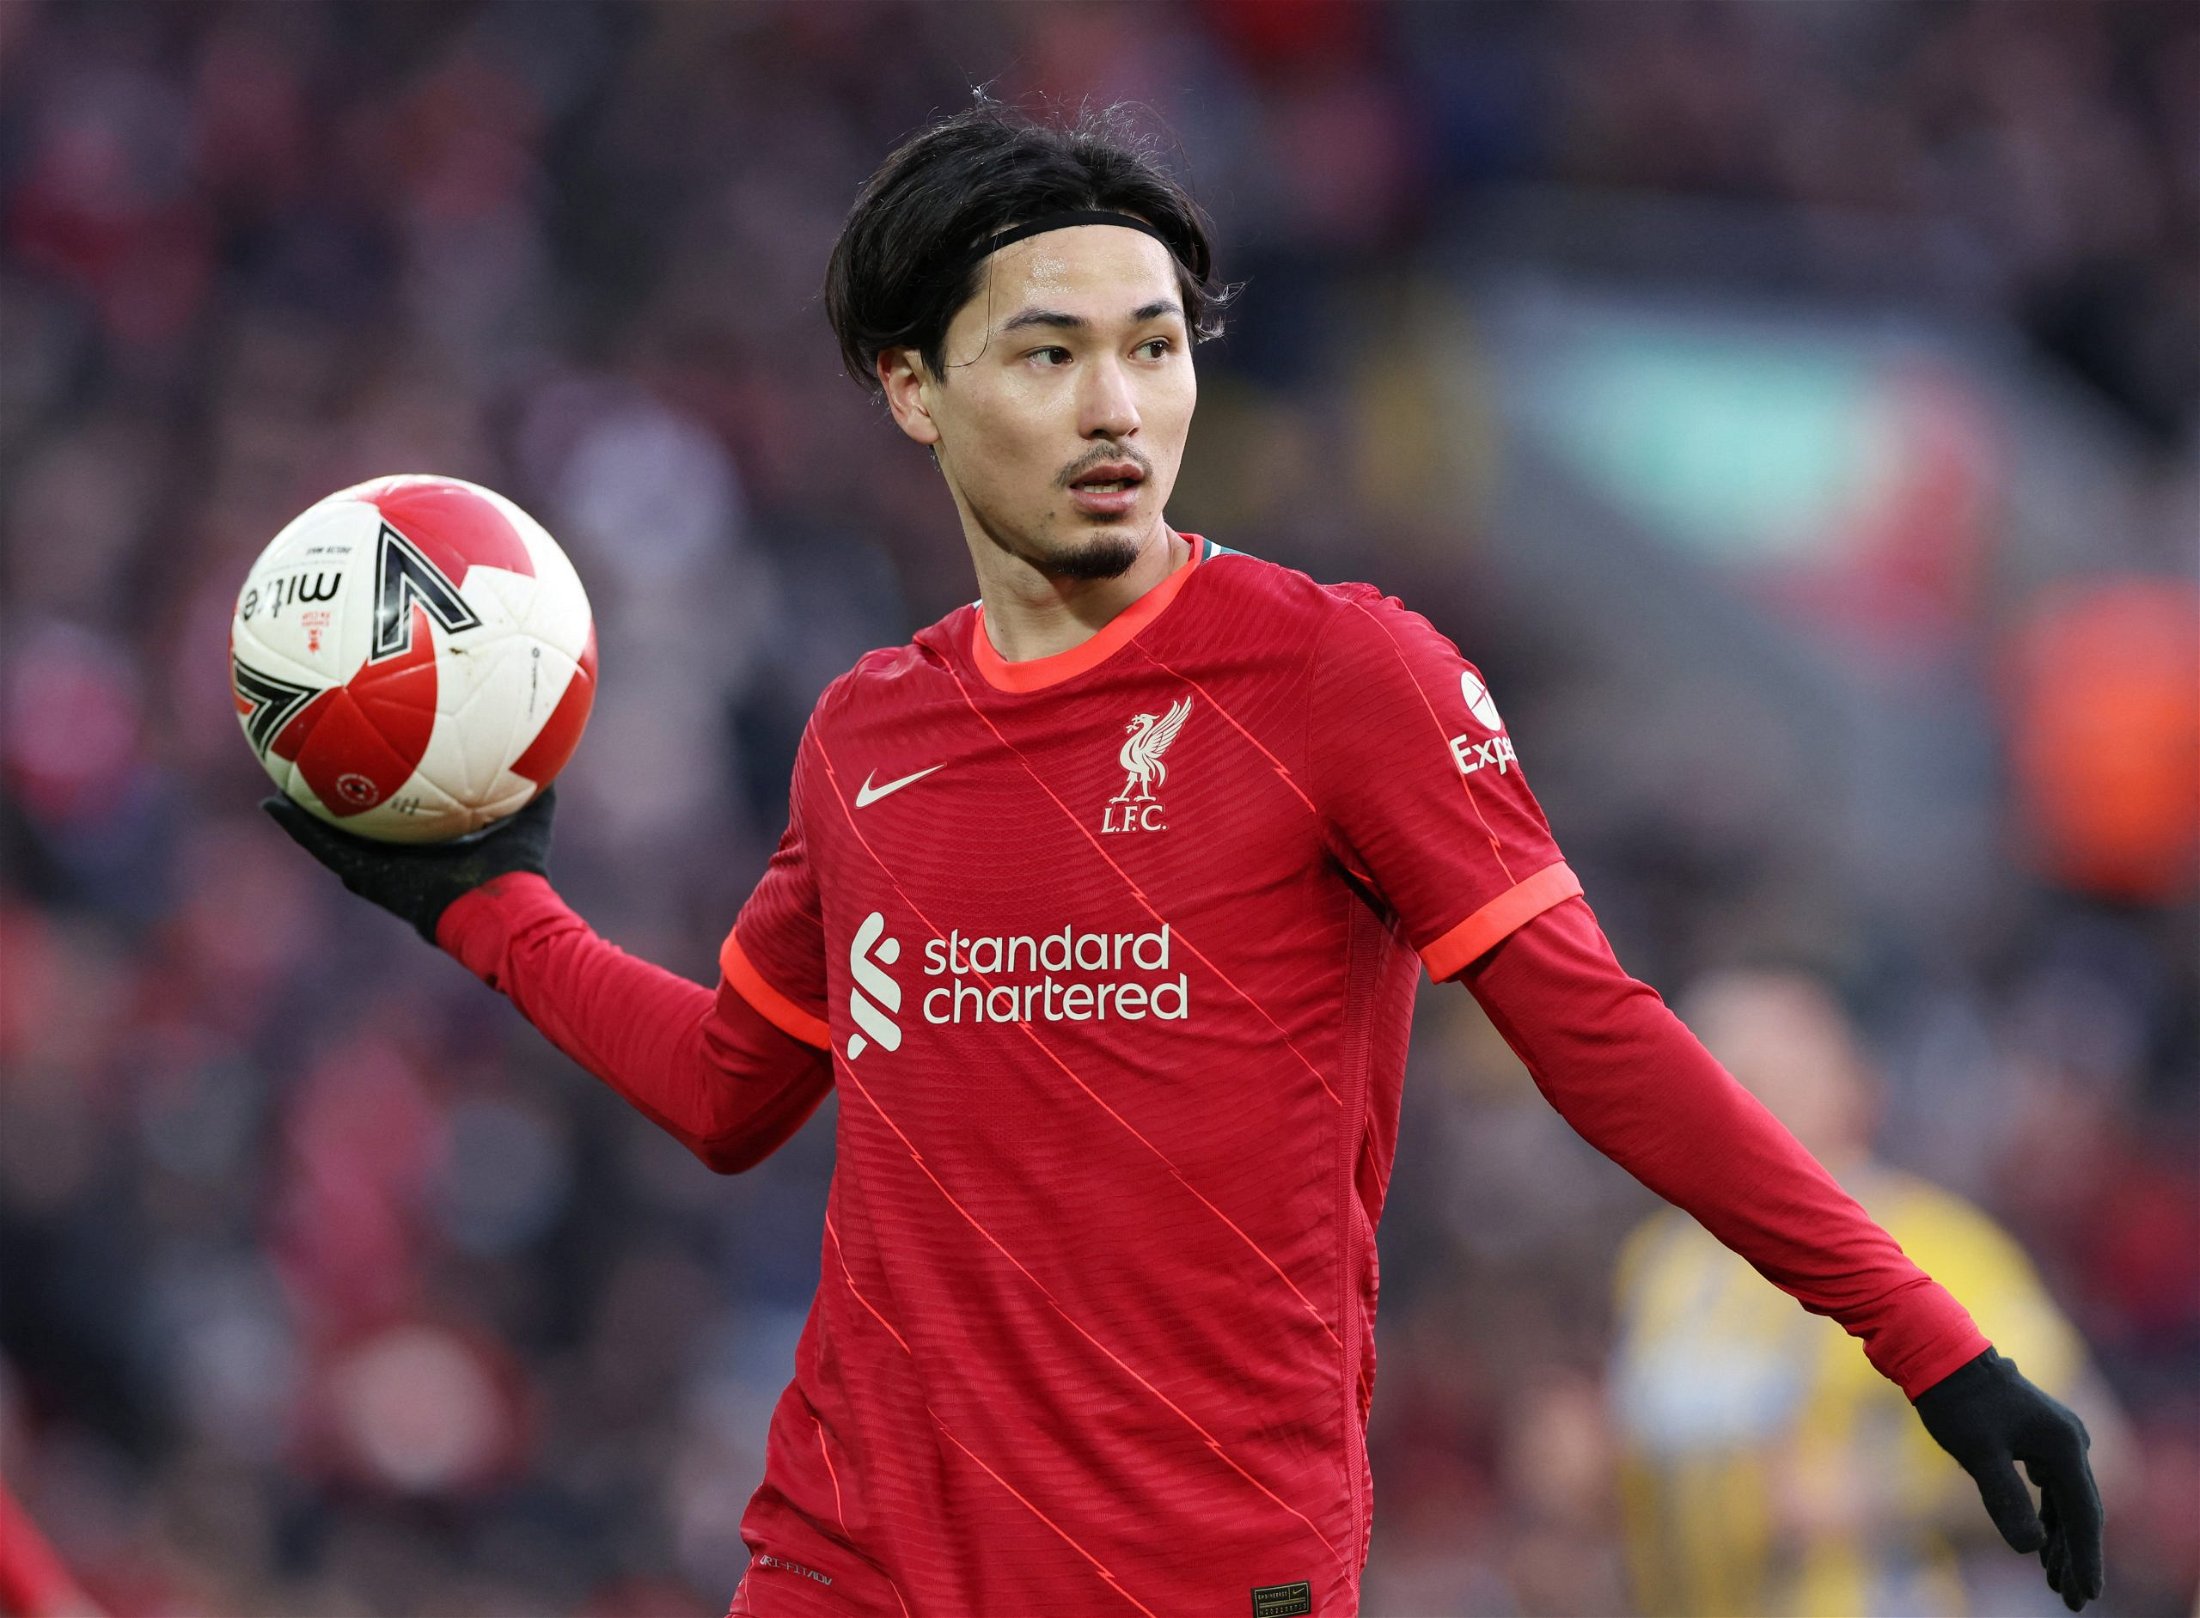  Reason behind Leeds United’s January interest in Liverpool and Chelsea duo’s becomes clearer